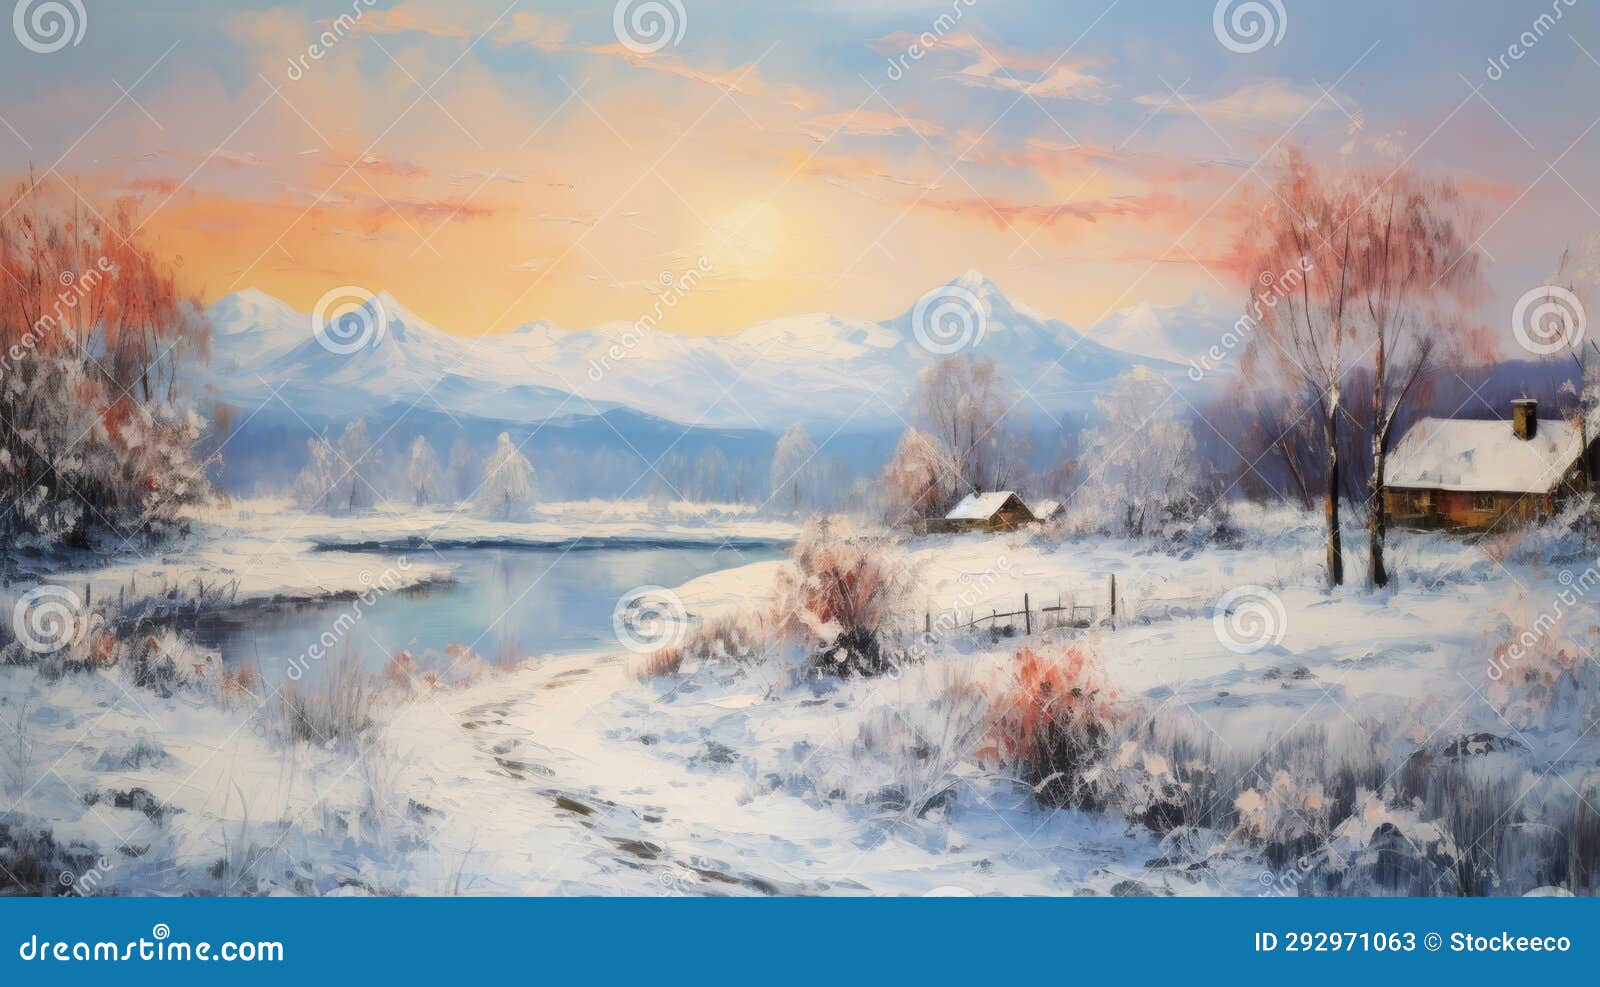 Winter Landscape Oil Painting: Serene Rural Scenes with Snow Covered  Mountains Stock Illustration - Illustration of rural, warm: 292971063